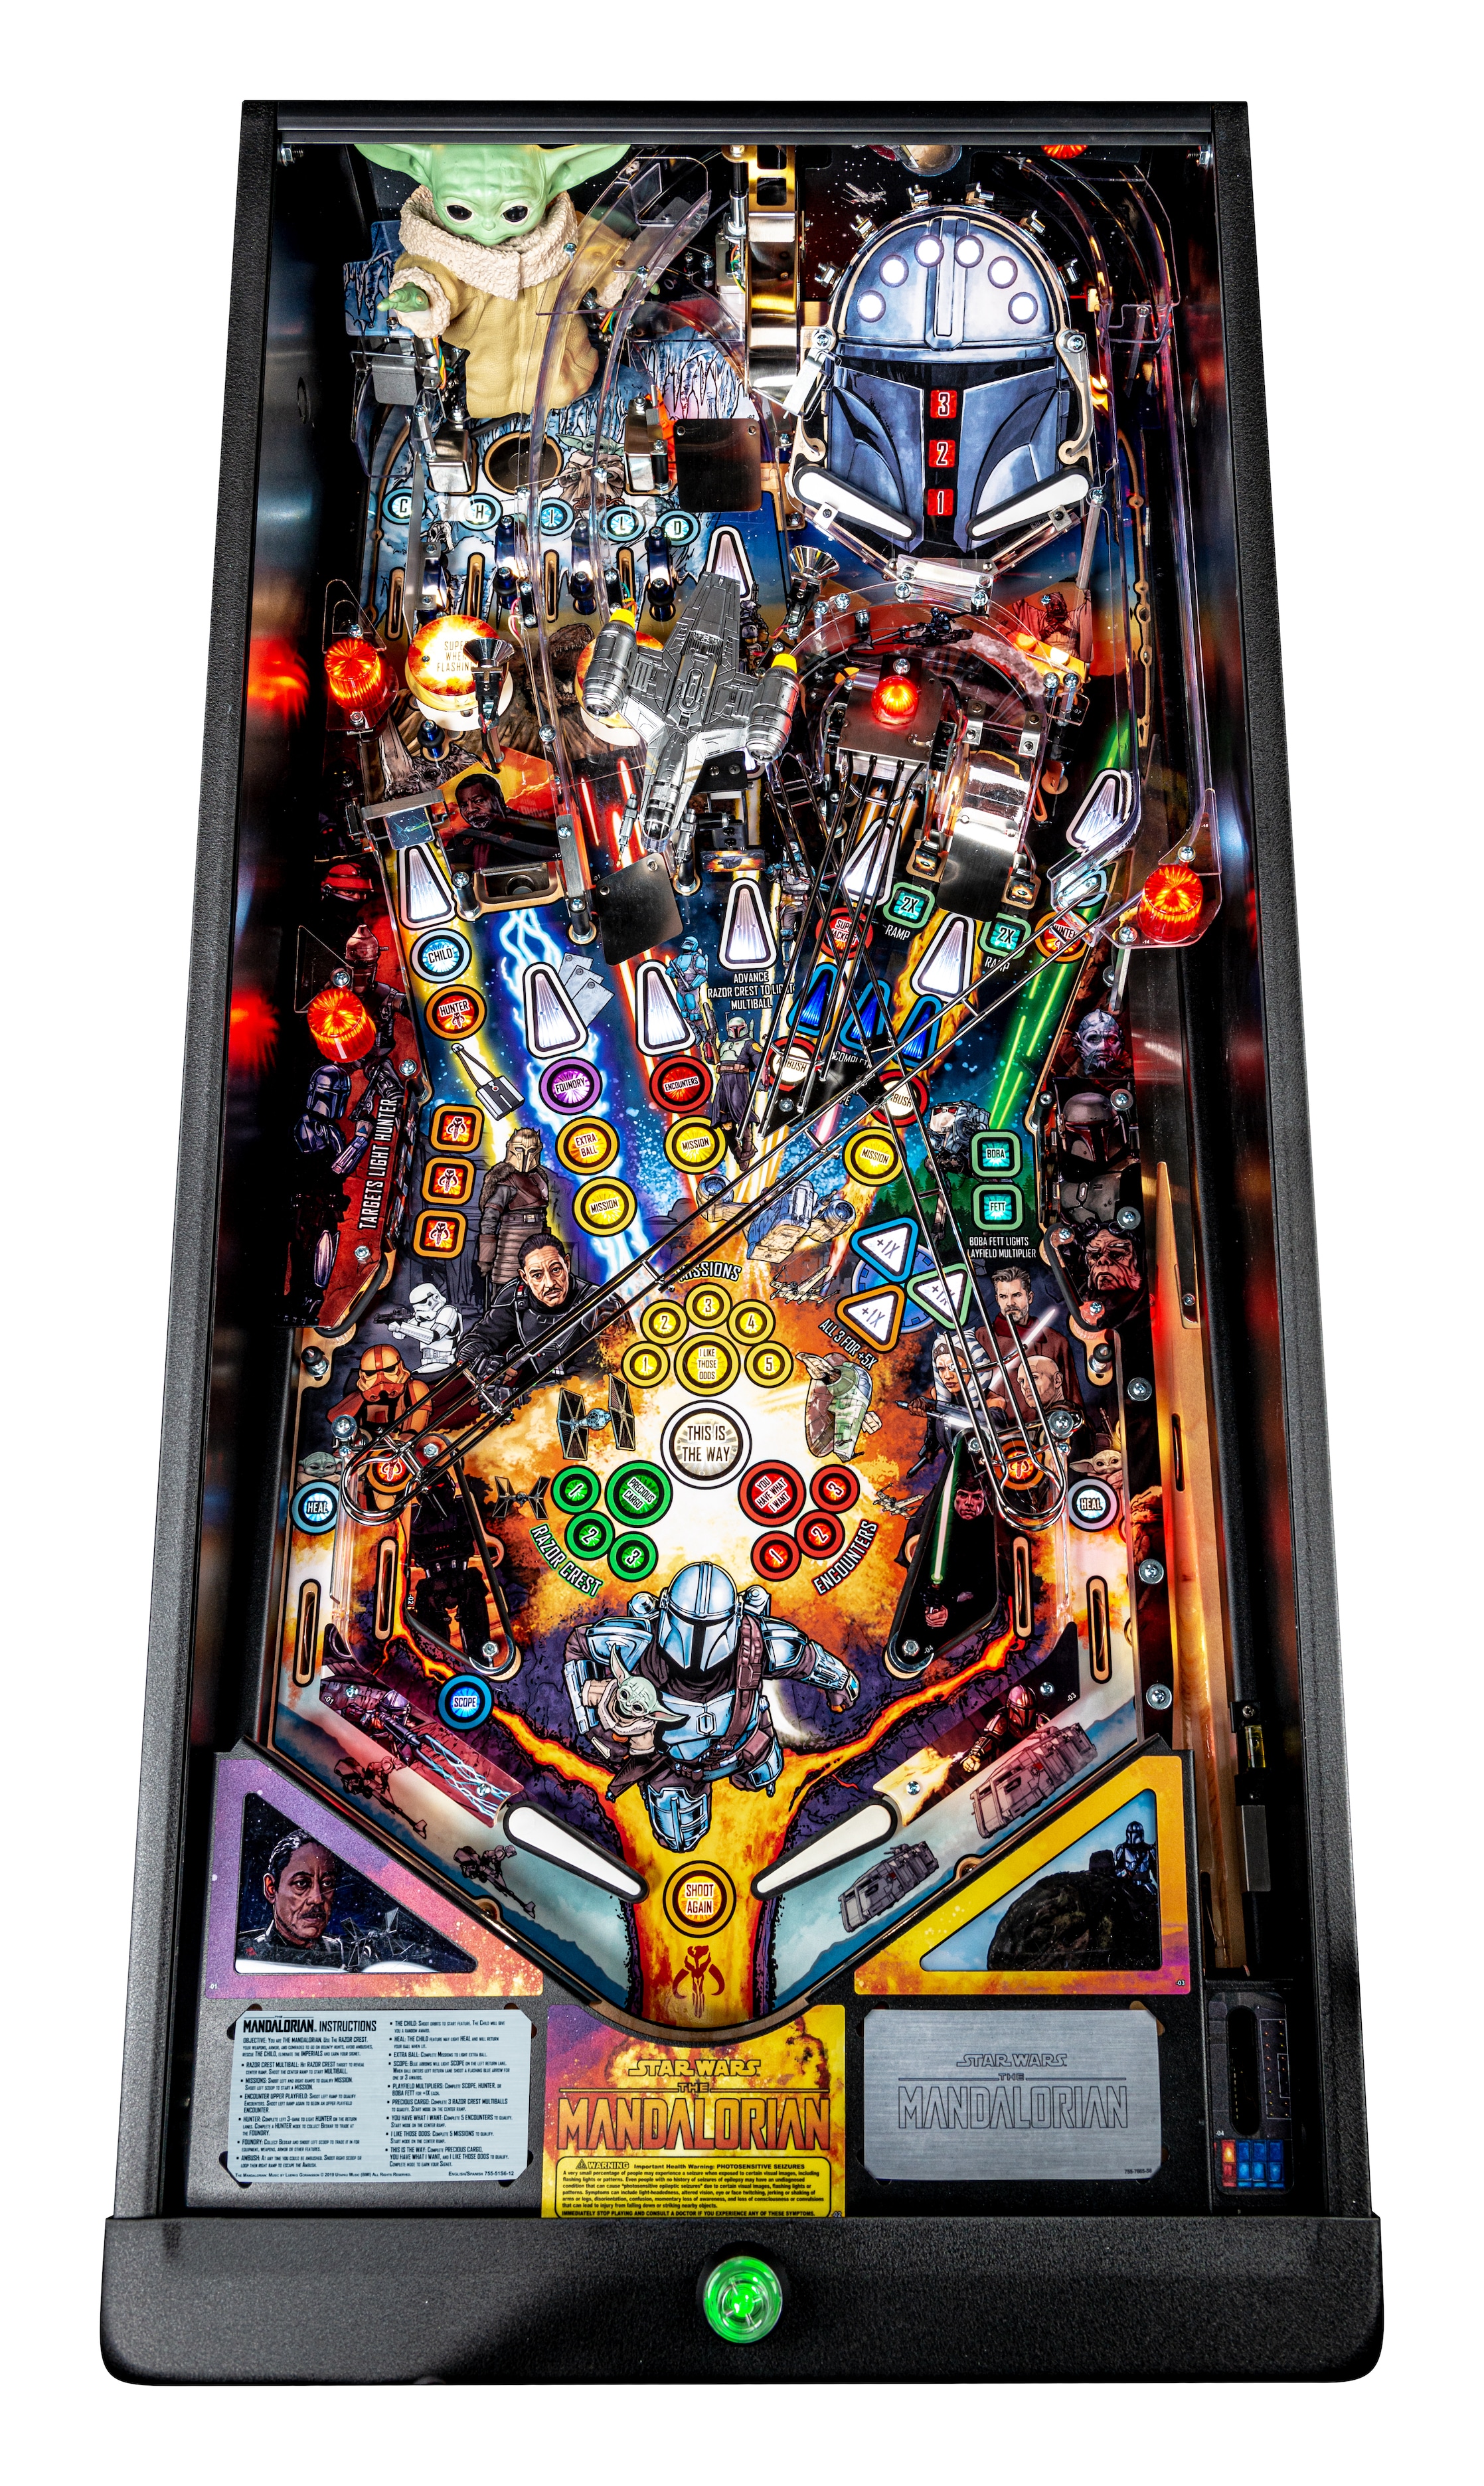 Top-down playfield image of Stern’s The Mandalorian premium playfield layout